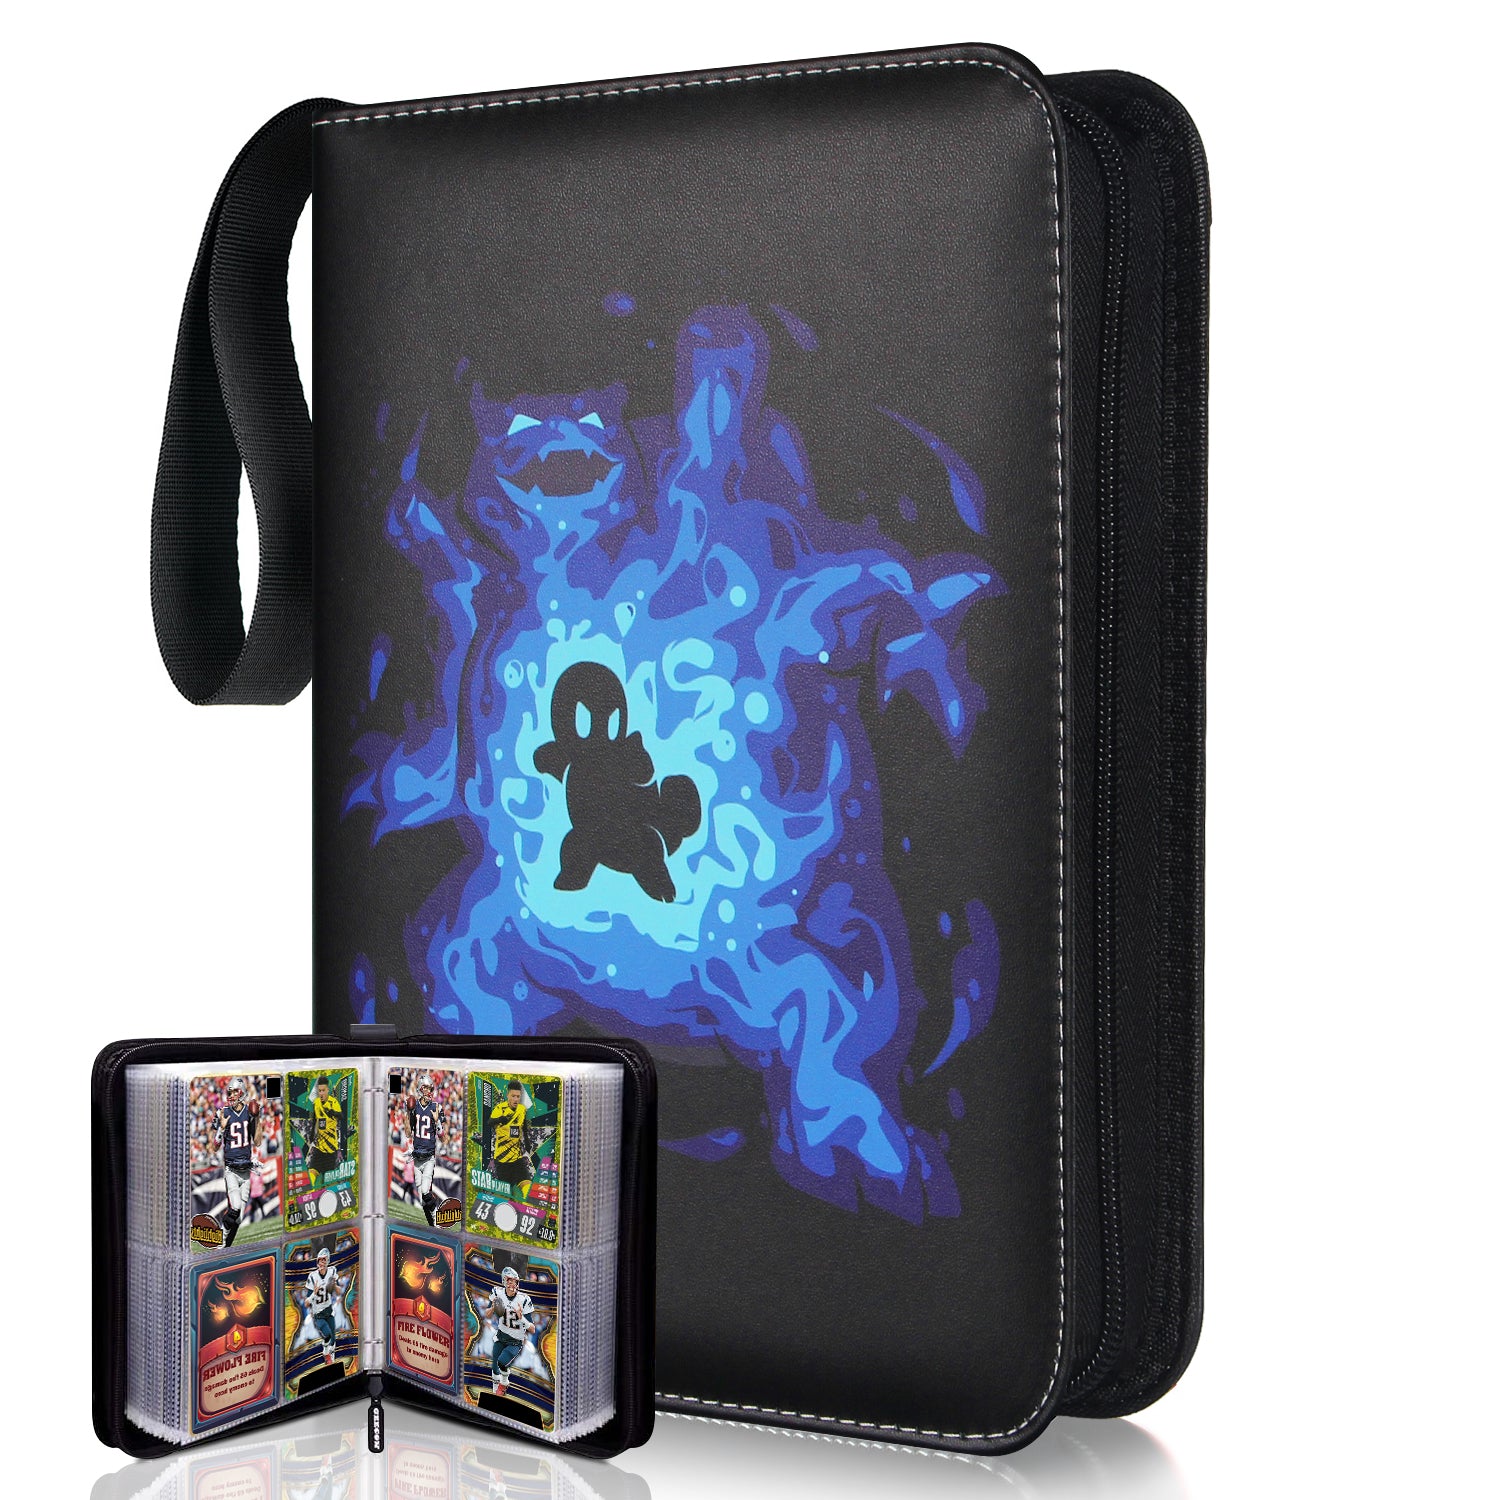 400 Pockets Pokemon Trading Cards Binder - Squirtle